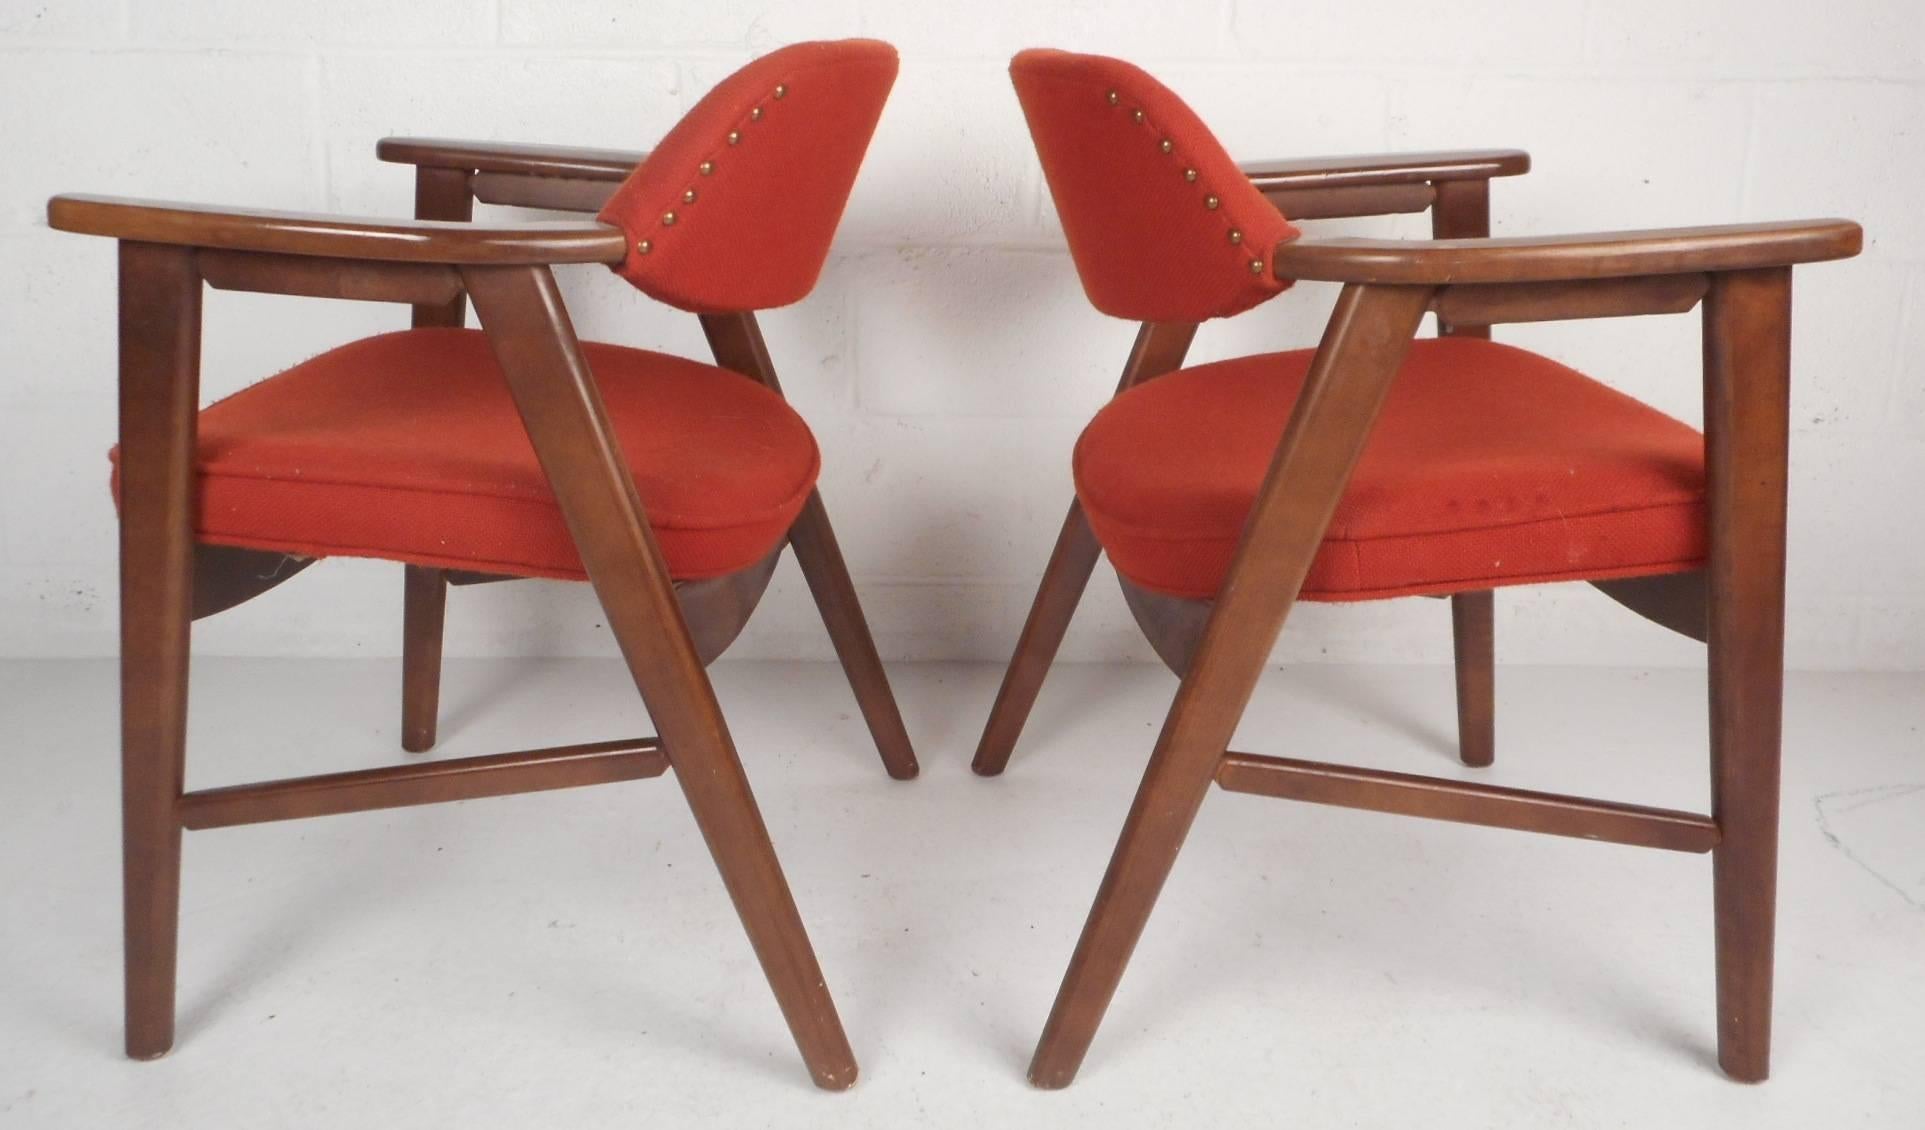 Pair of Scandinavian Modern Arm Chairs In Good Condition For Sale In Brooklyn, NY